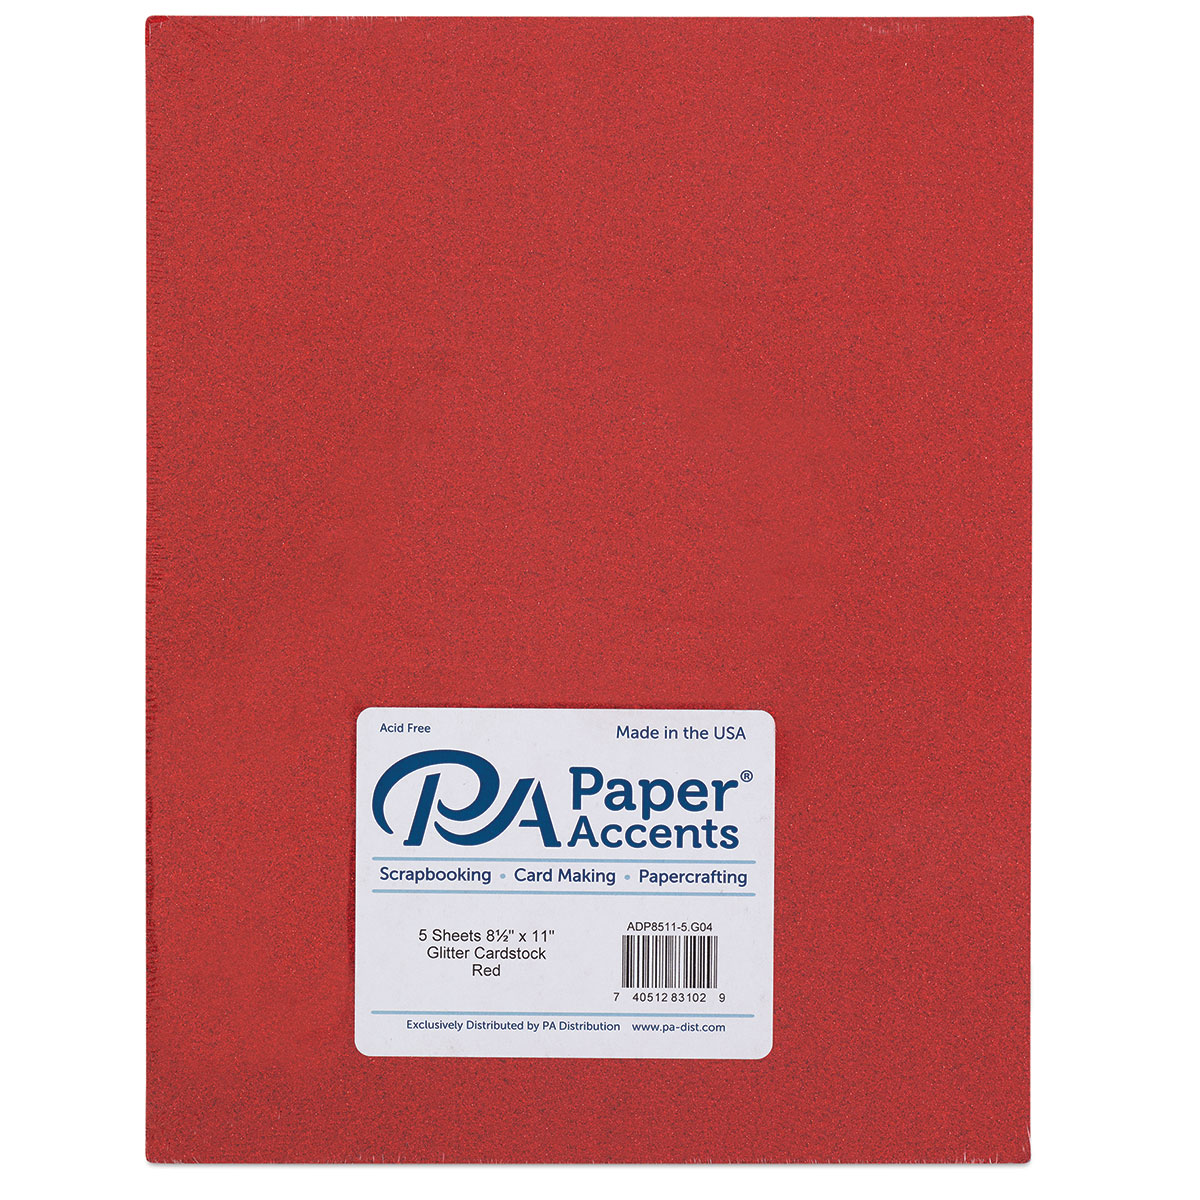 Paper Accents Glitter Cardstock - Red, 8-1/2 x 11, Pkg of 5 Sheets 